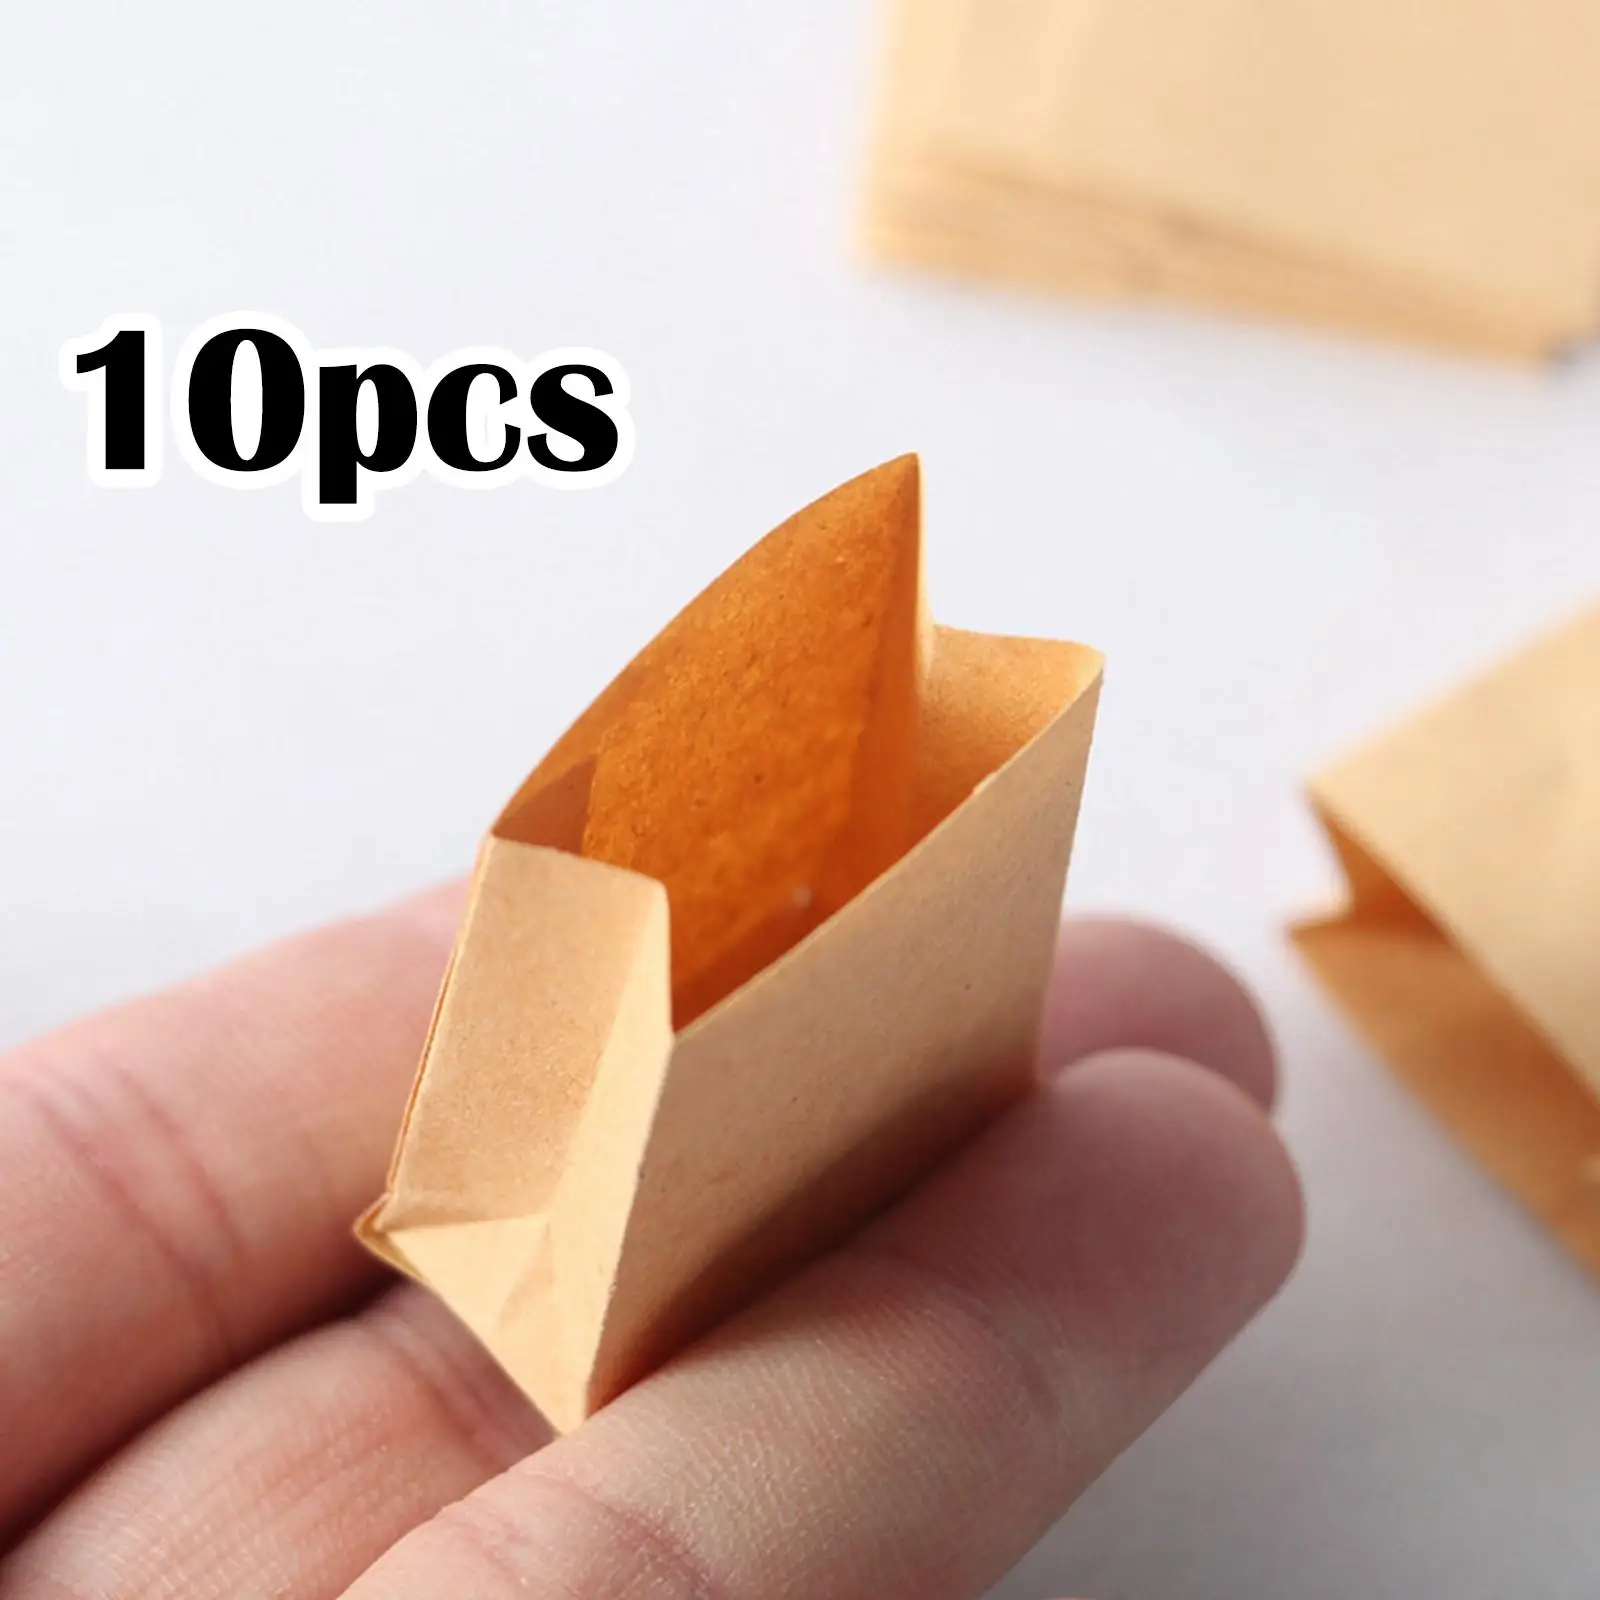 10 Pieces Mini Bread Bag Brown Paper Lunch Bags Snack Bags for 1:12 Dollhouse Bakery Shop Decor Kitchen Playset Creative Toys